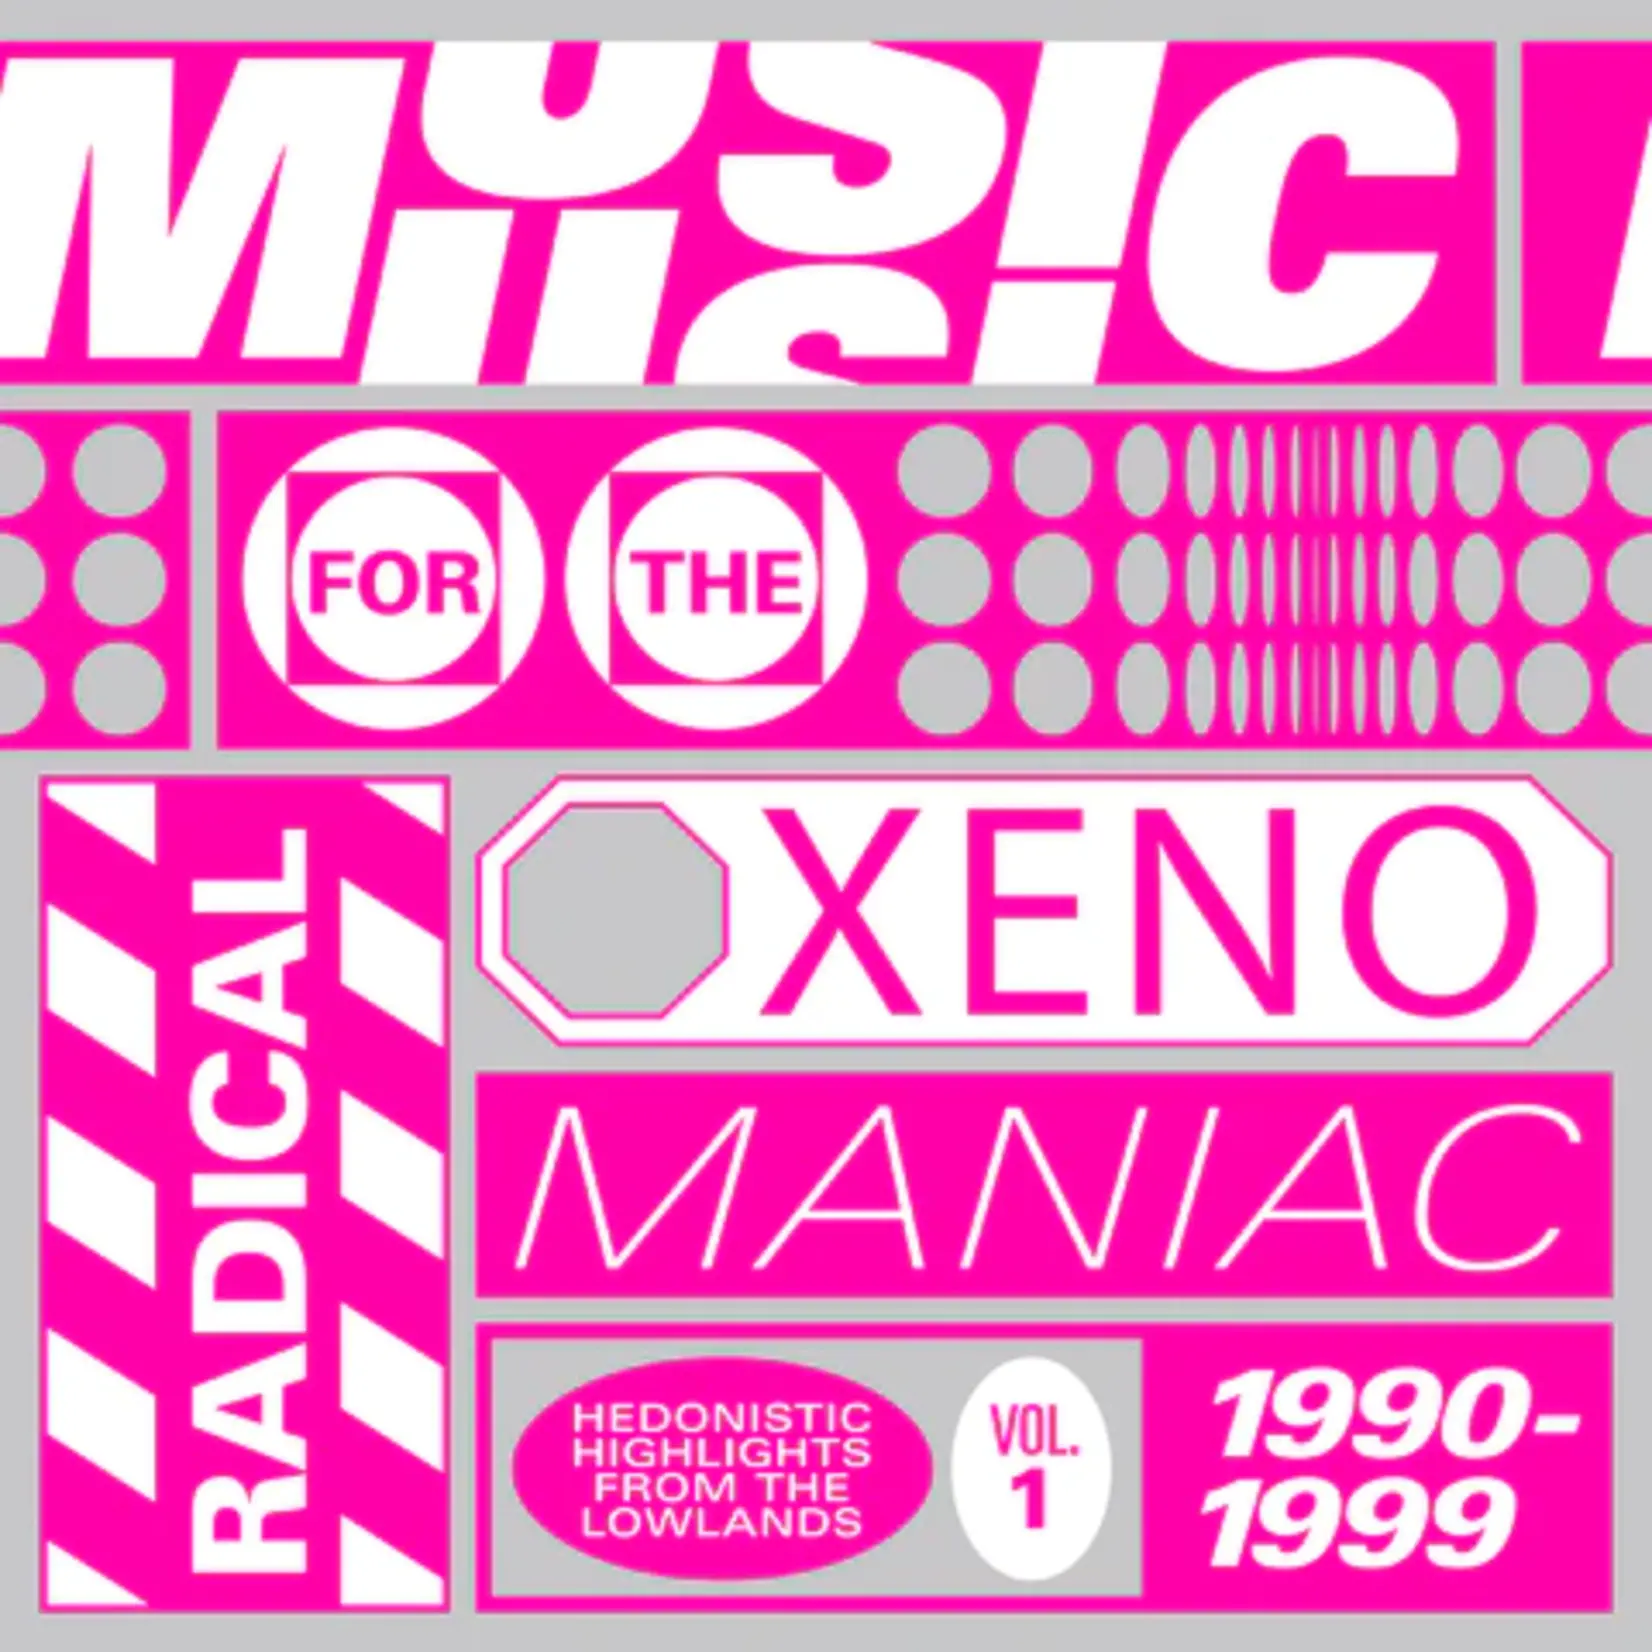 V/A - Music For The Radical Xenomaniac Vol. 1 (Hedonistic Highlights From The Lowlands 1990-1999)